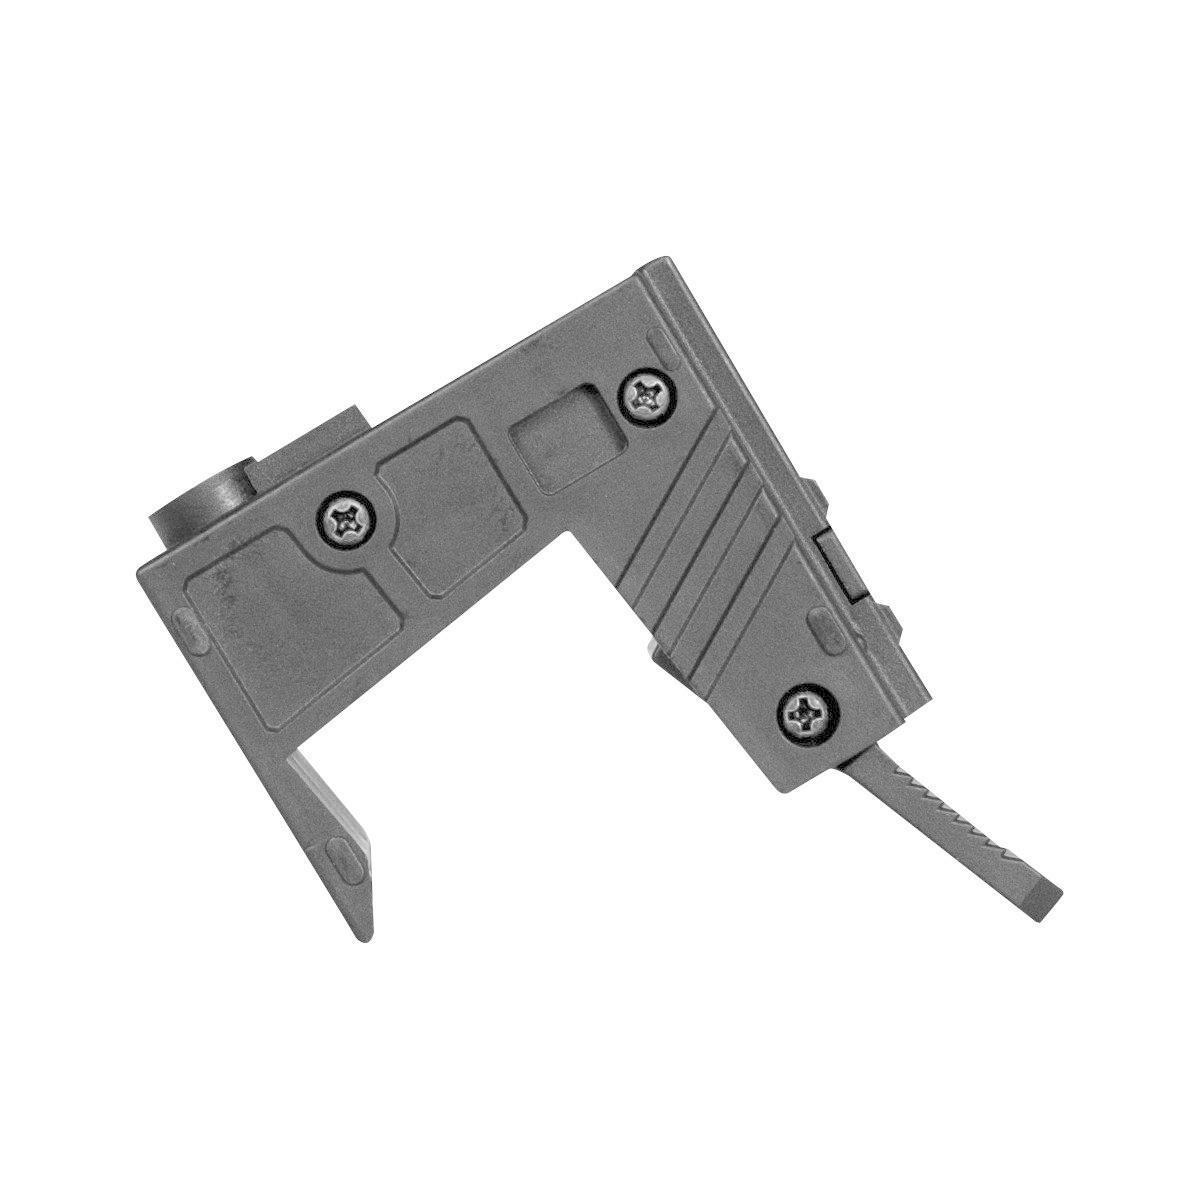 Valken SMG magazine Adapter for the ASL Series